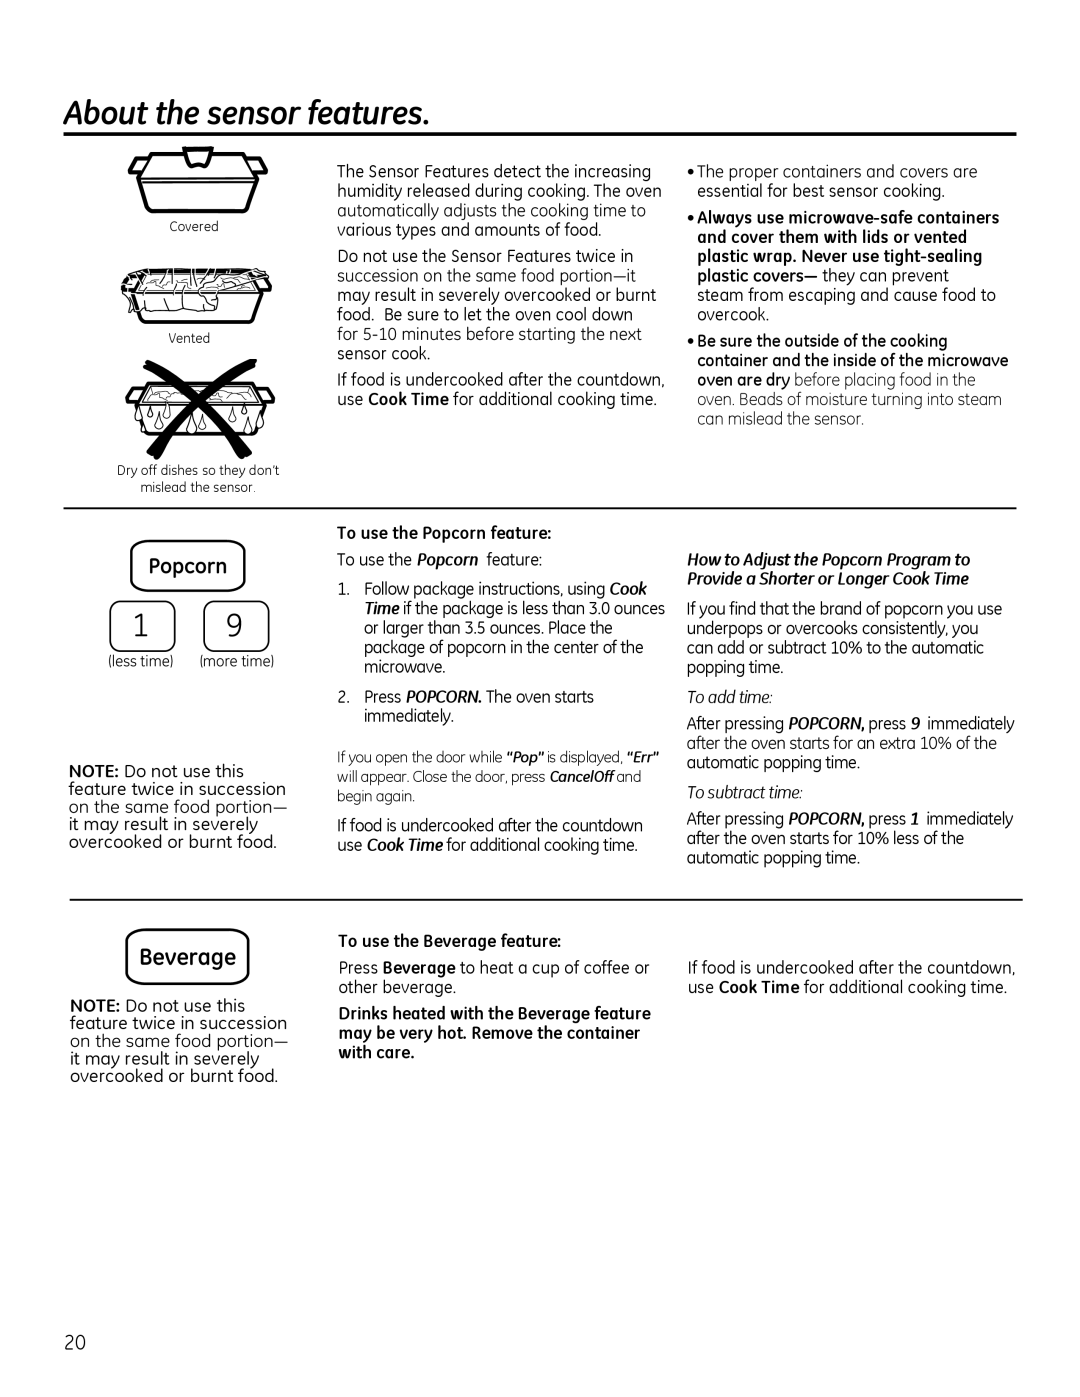 GE Microwave Oven owner manual About the sensor features, To use the Popcorn feature, To use the Beverage feature 